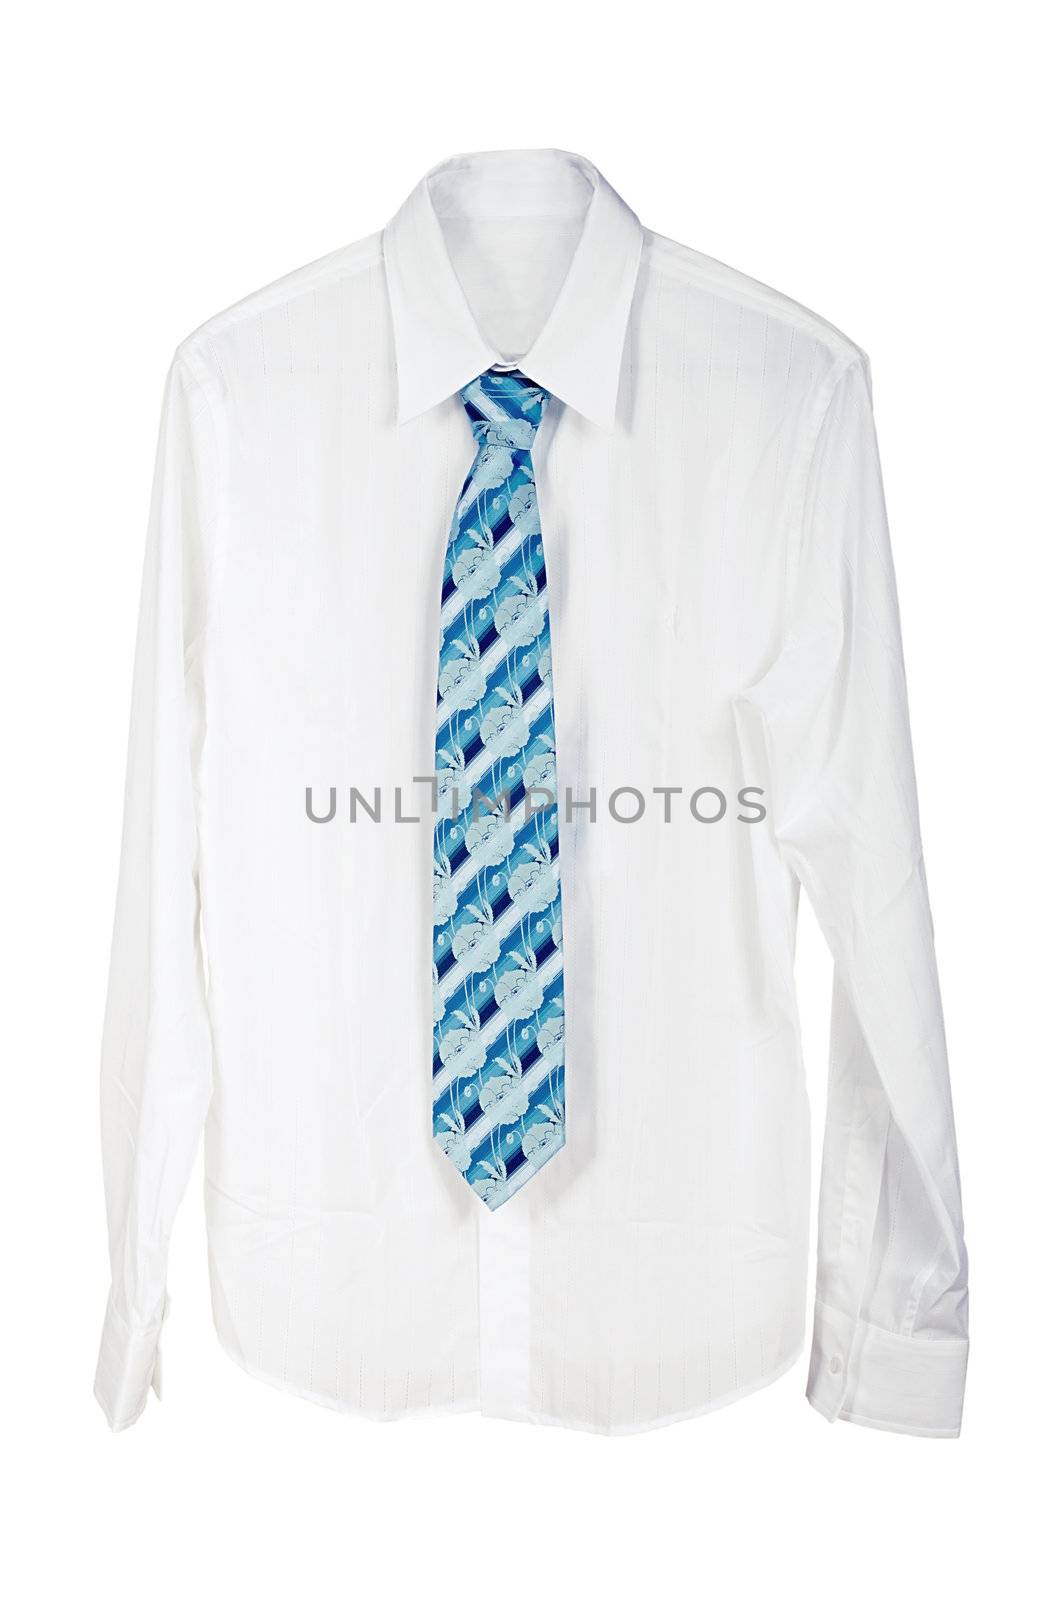 Man's shirt with a tie on a white background